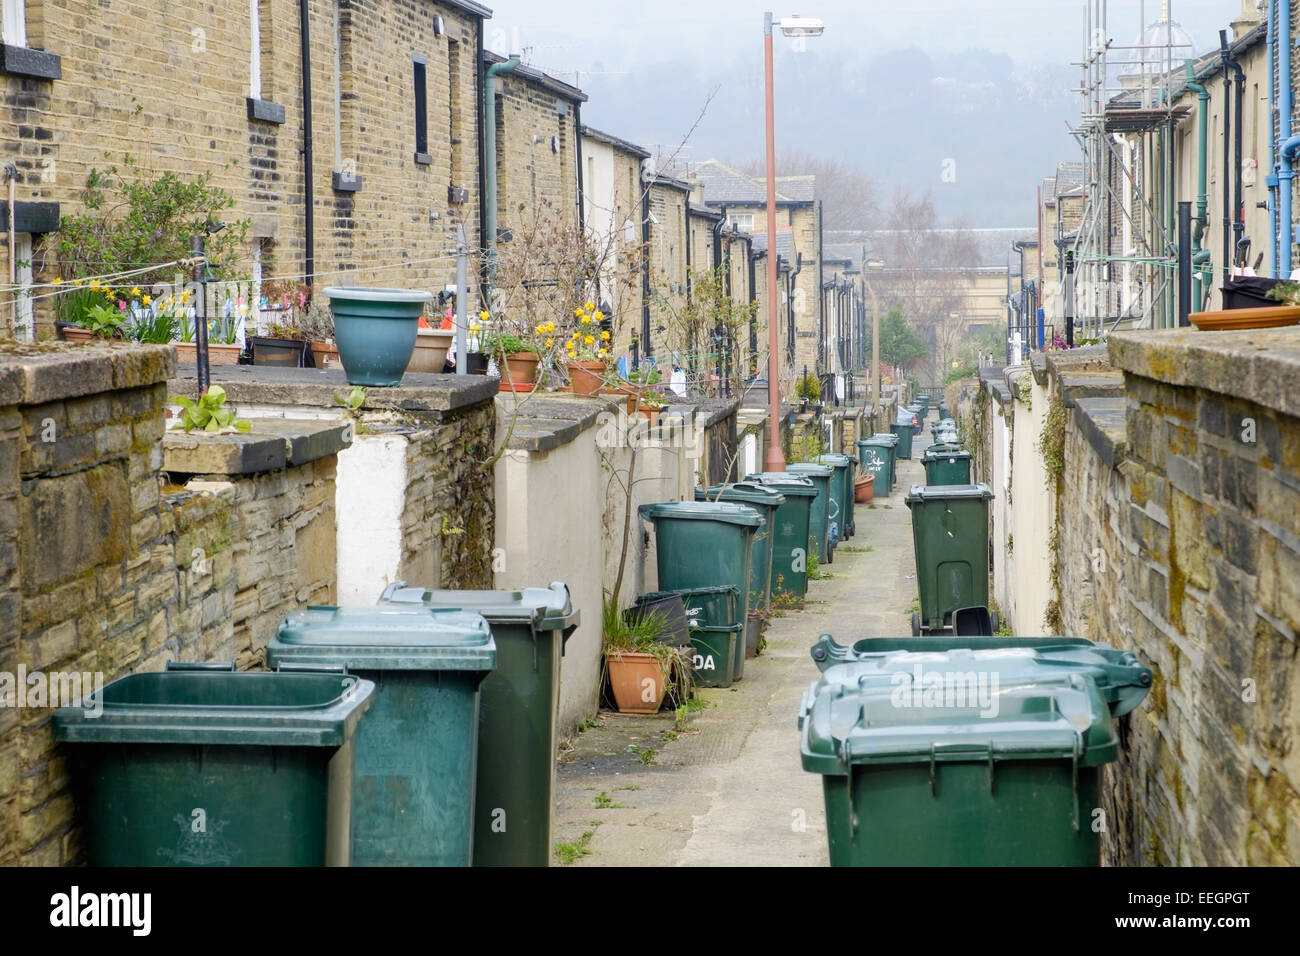 The back alley full of wheelie bins, in the traditional Victorian northern mill town of Saltaire, in Yorkshire, UK. Stock Photo